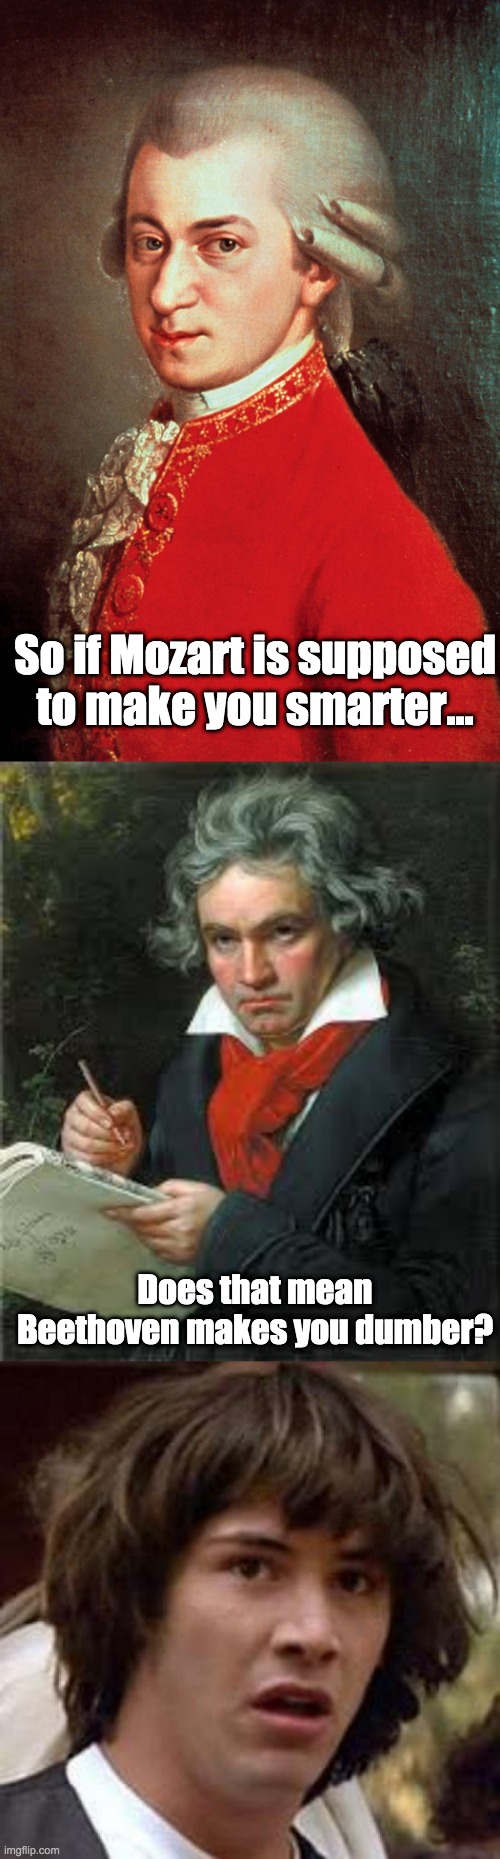 Never thought of it THAT way, did you? | So if Mozart is supposed to make you smarter... Does that mean Beethoven makes you dumber? | image tagged in mozart,beethoven | made w/ Imgflip meme maker